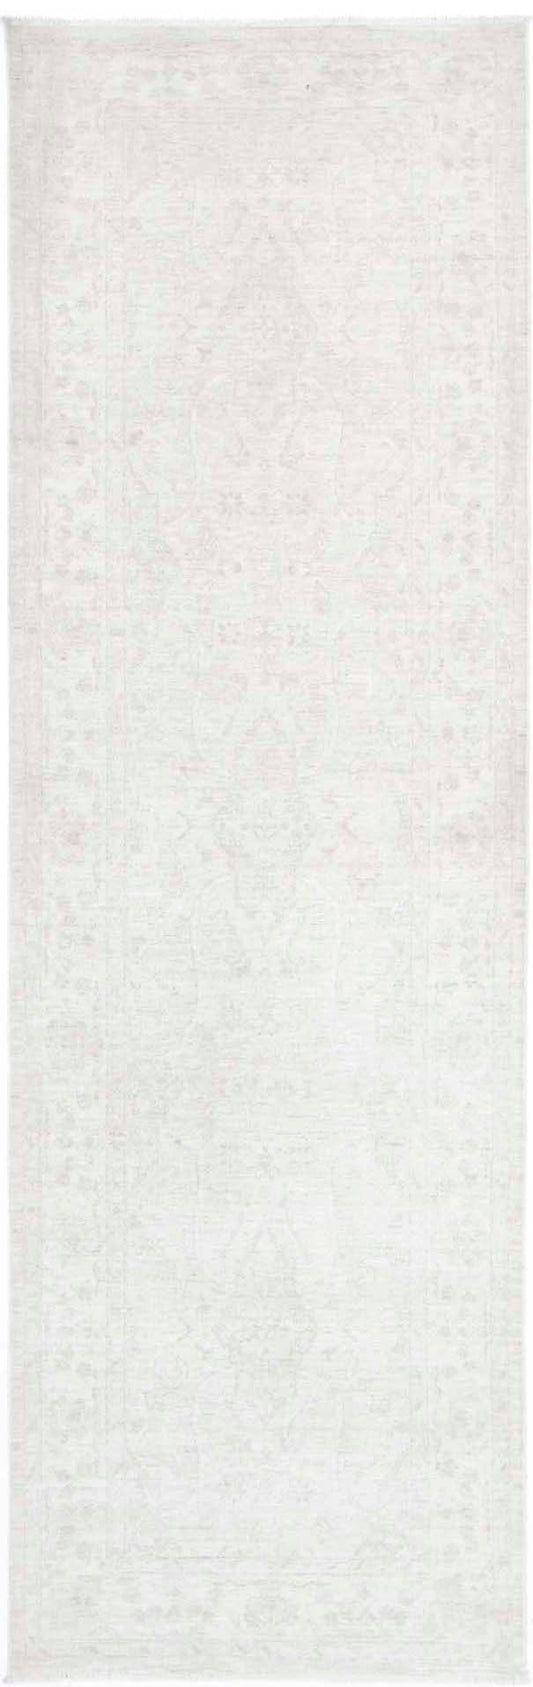 Hand Knotted Serenity Wool Rug - 3'2'' x 10'9''